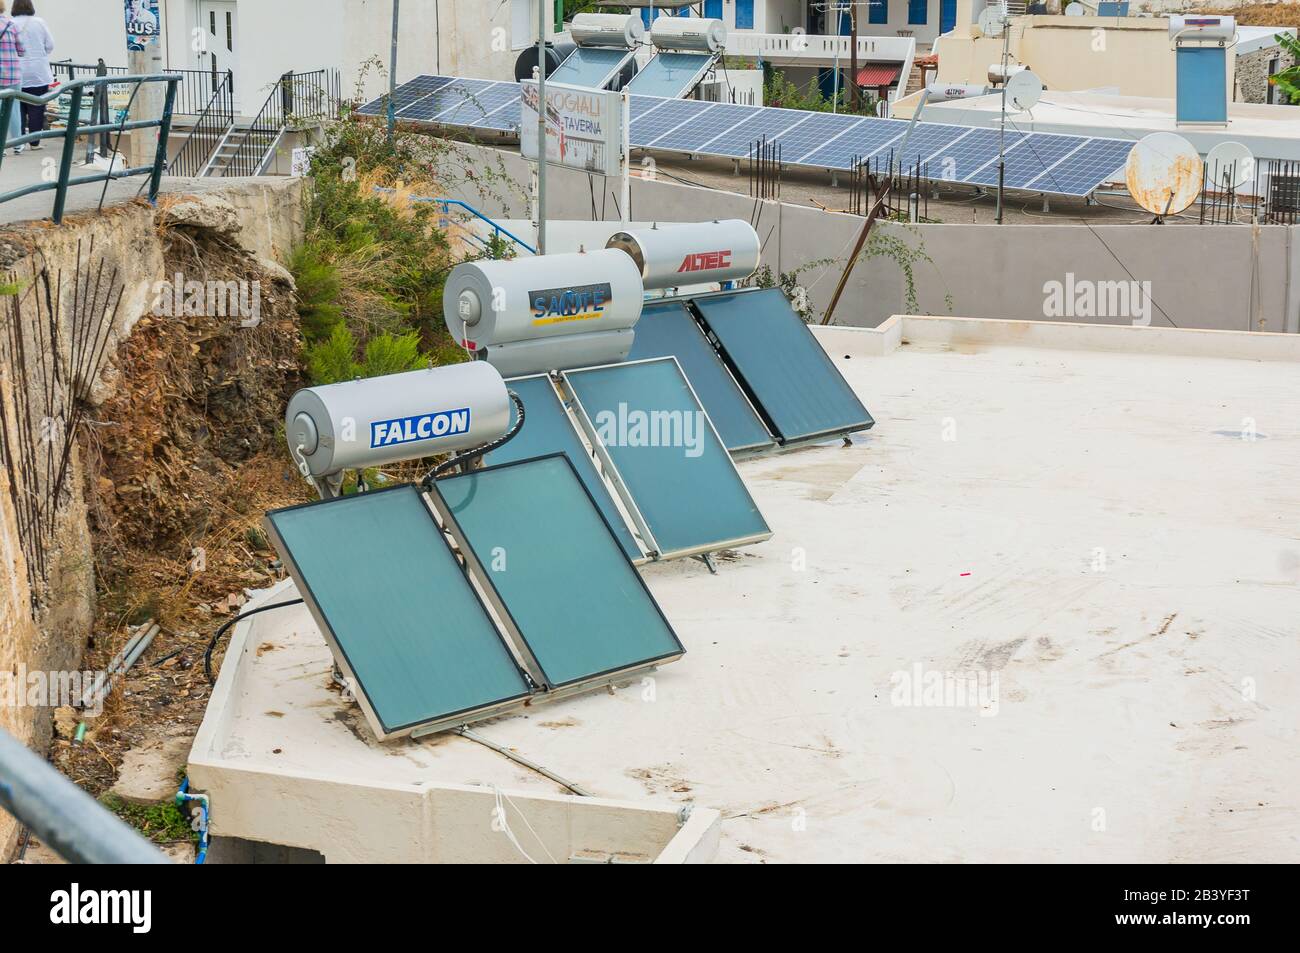 Bali, Crete, Greece -10.09.2019: solar water heaters on the roofs of houses. Stock Photo